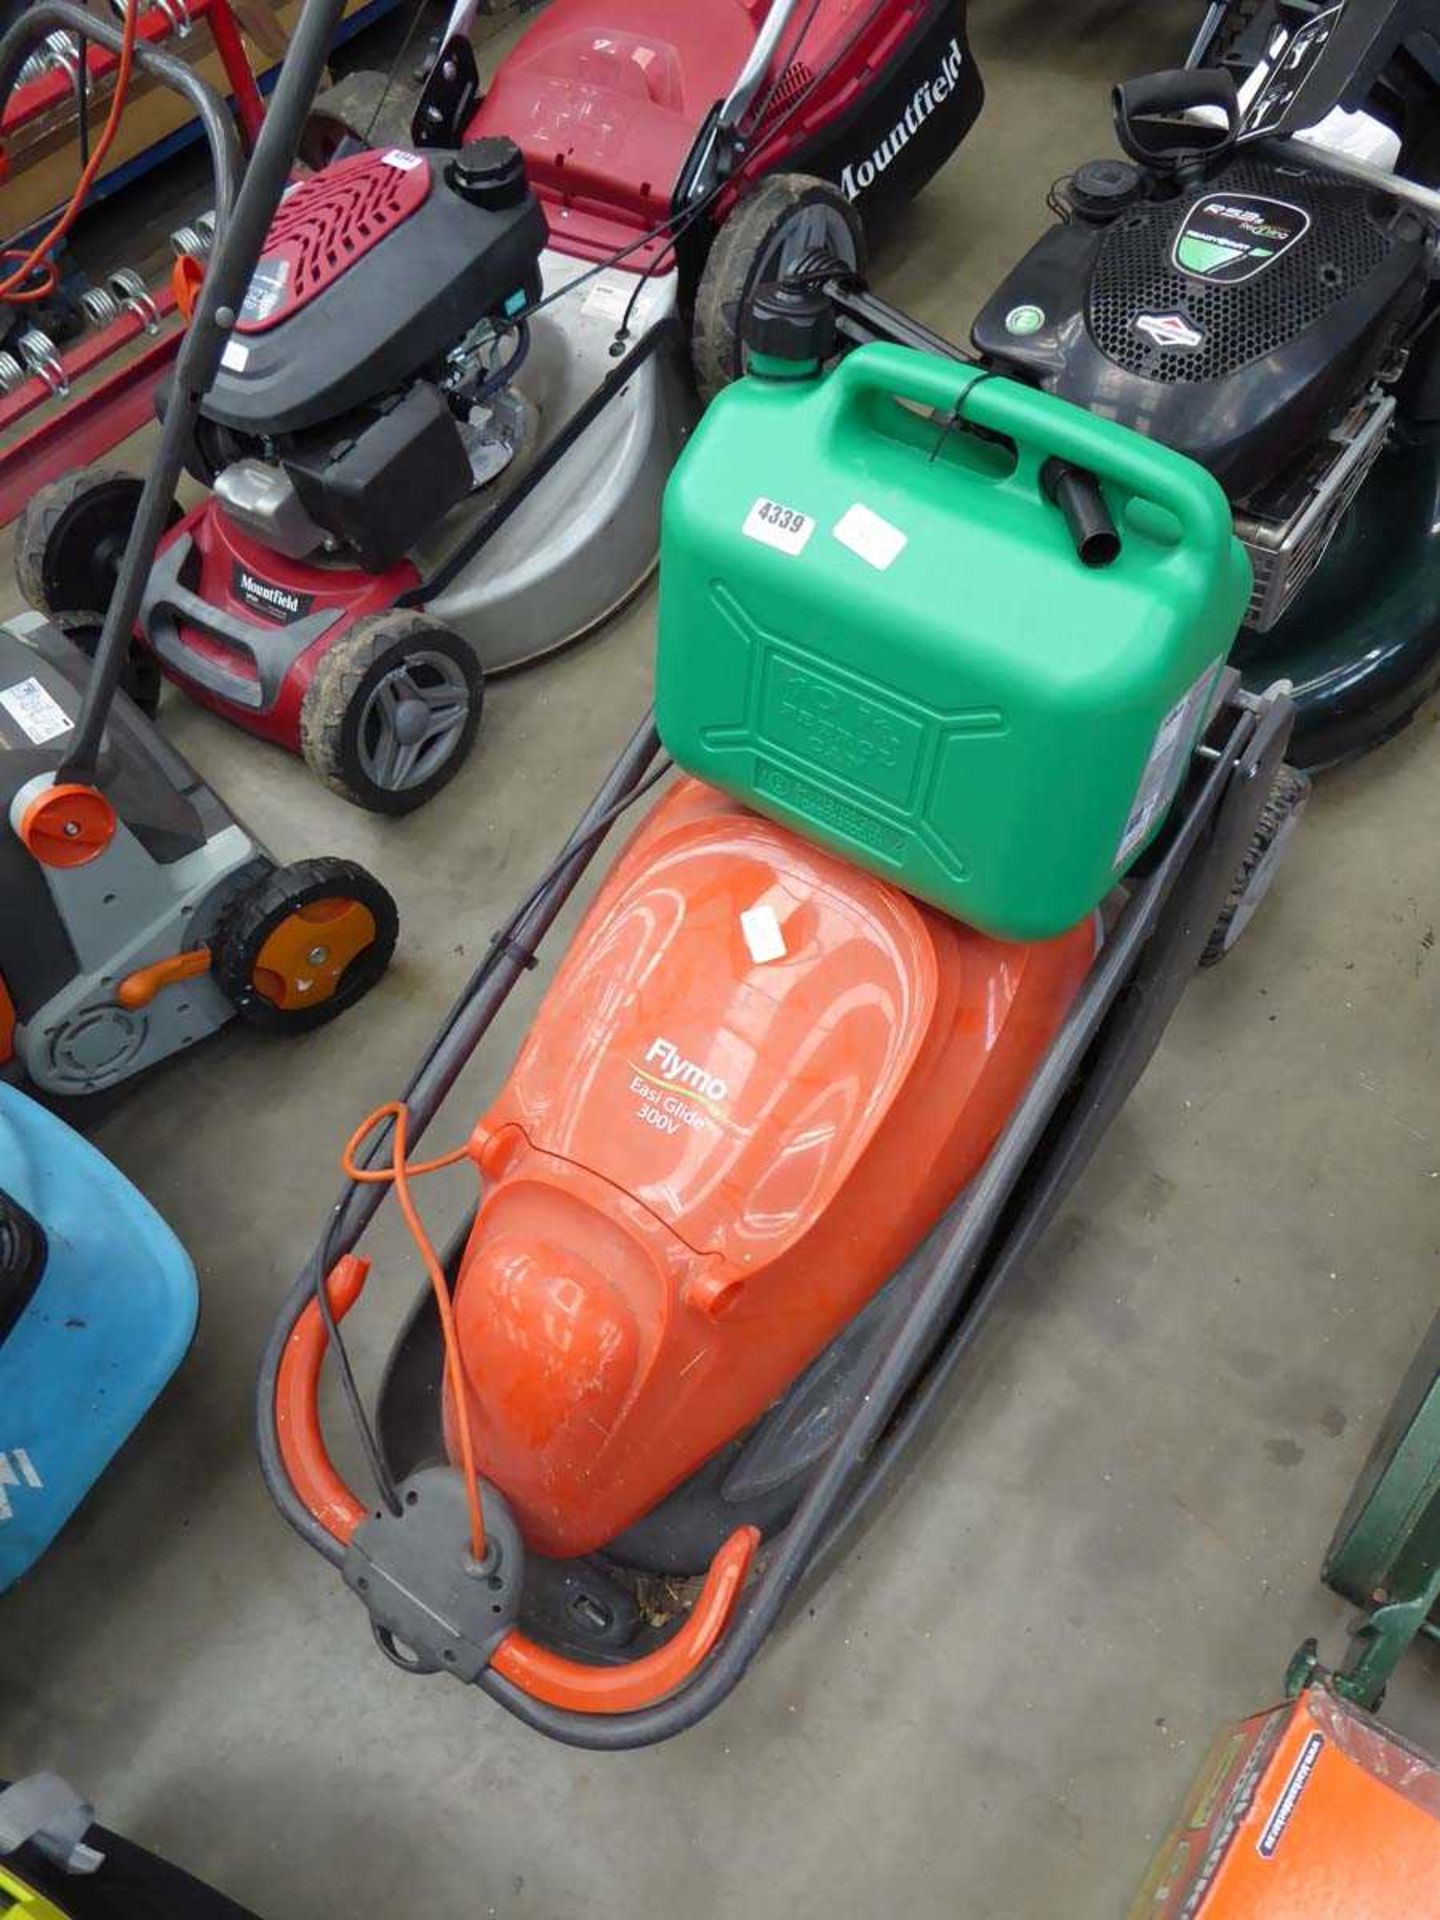 Flymo electric mower and a green fuel can